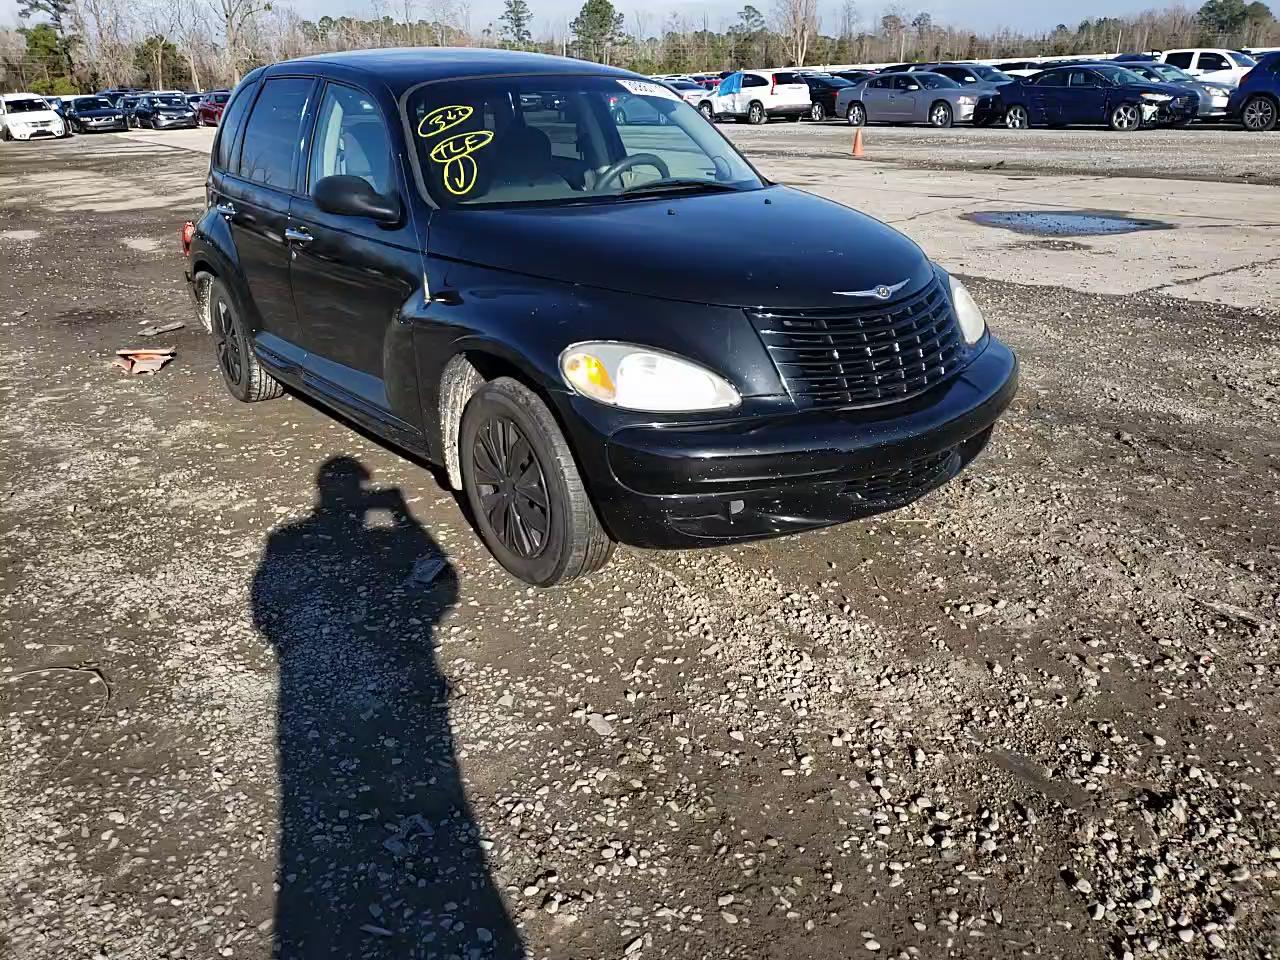 2002 CHEVROLET PT CRUISER - Other View